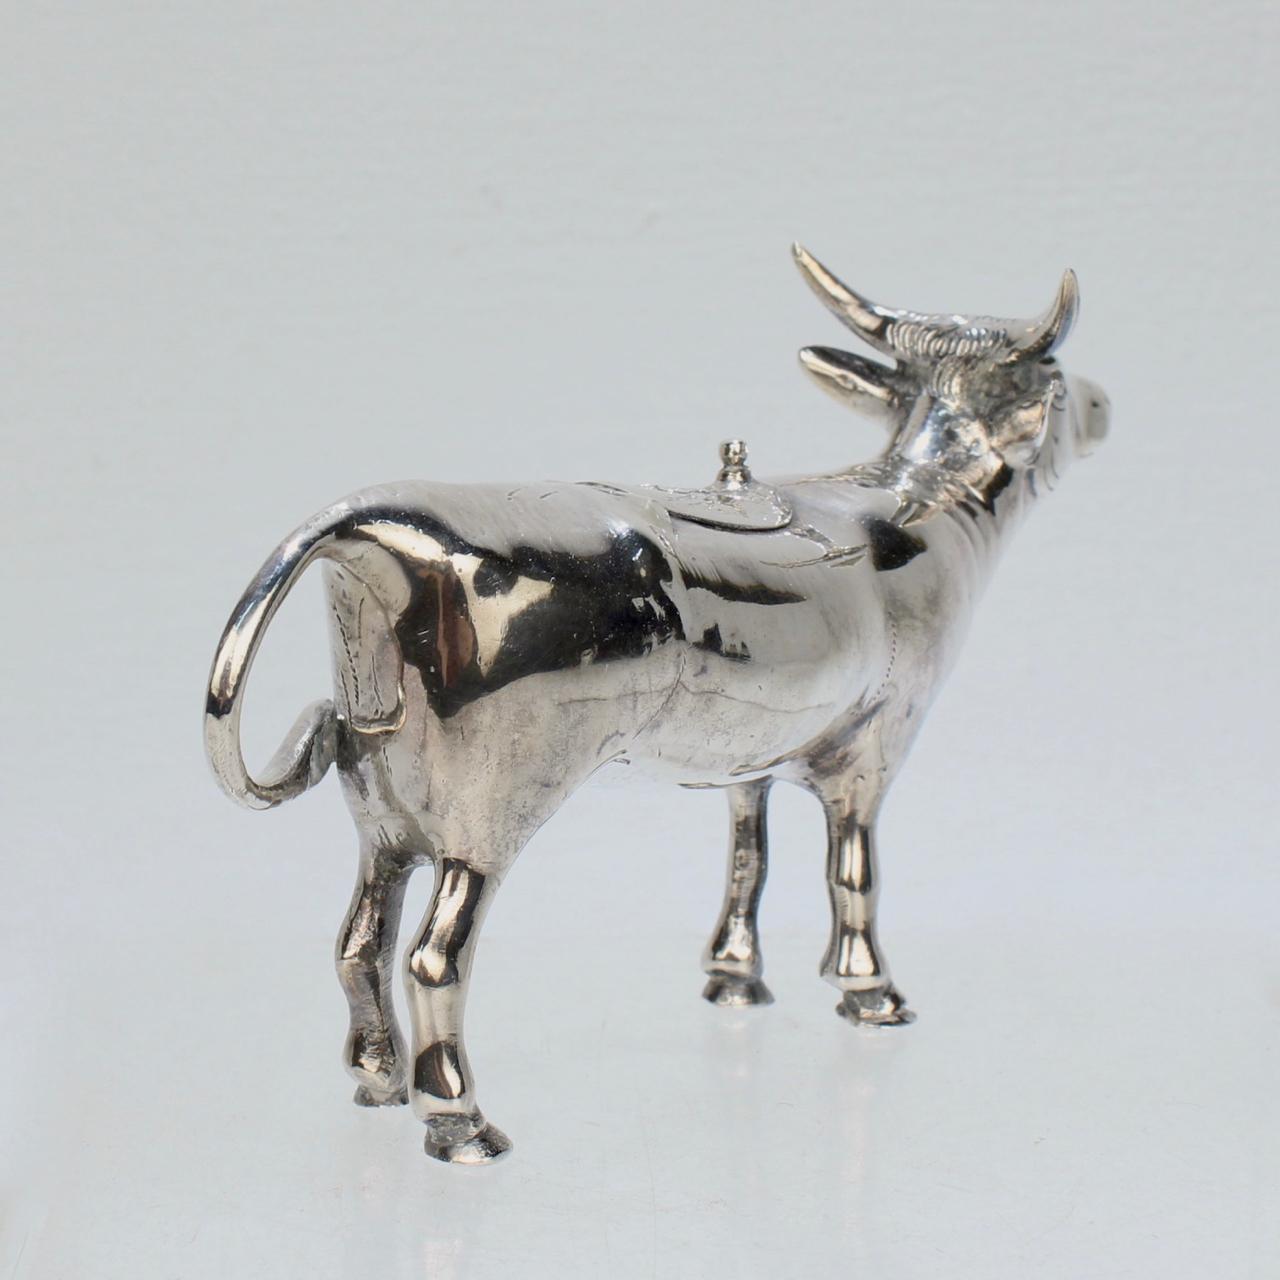 Figural Israel & Son Ltd. Sterling Silver Cow Creamer or Milk Pitcher In Good Condition For Sale In Philadelphia, PA